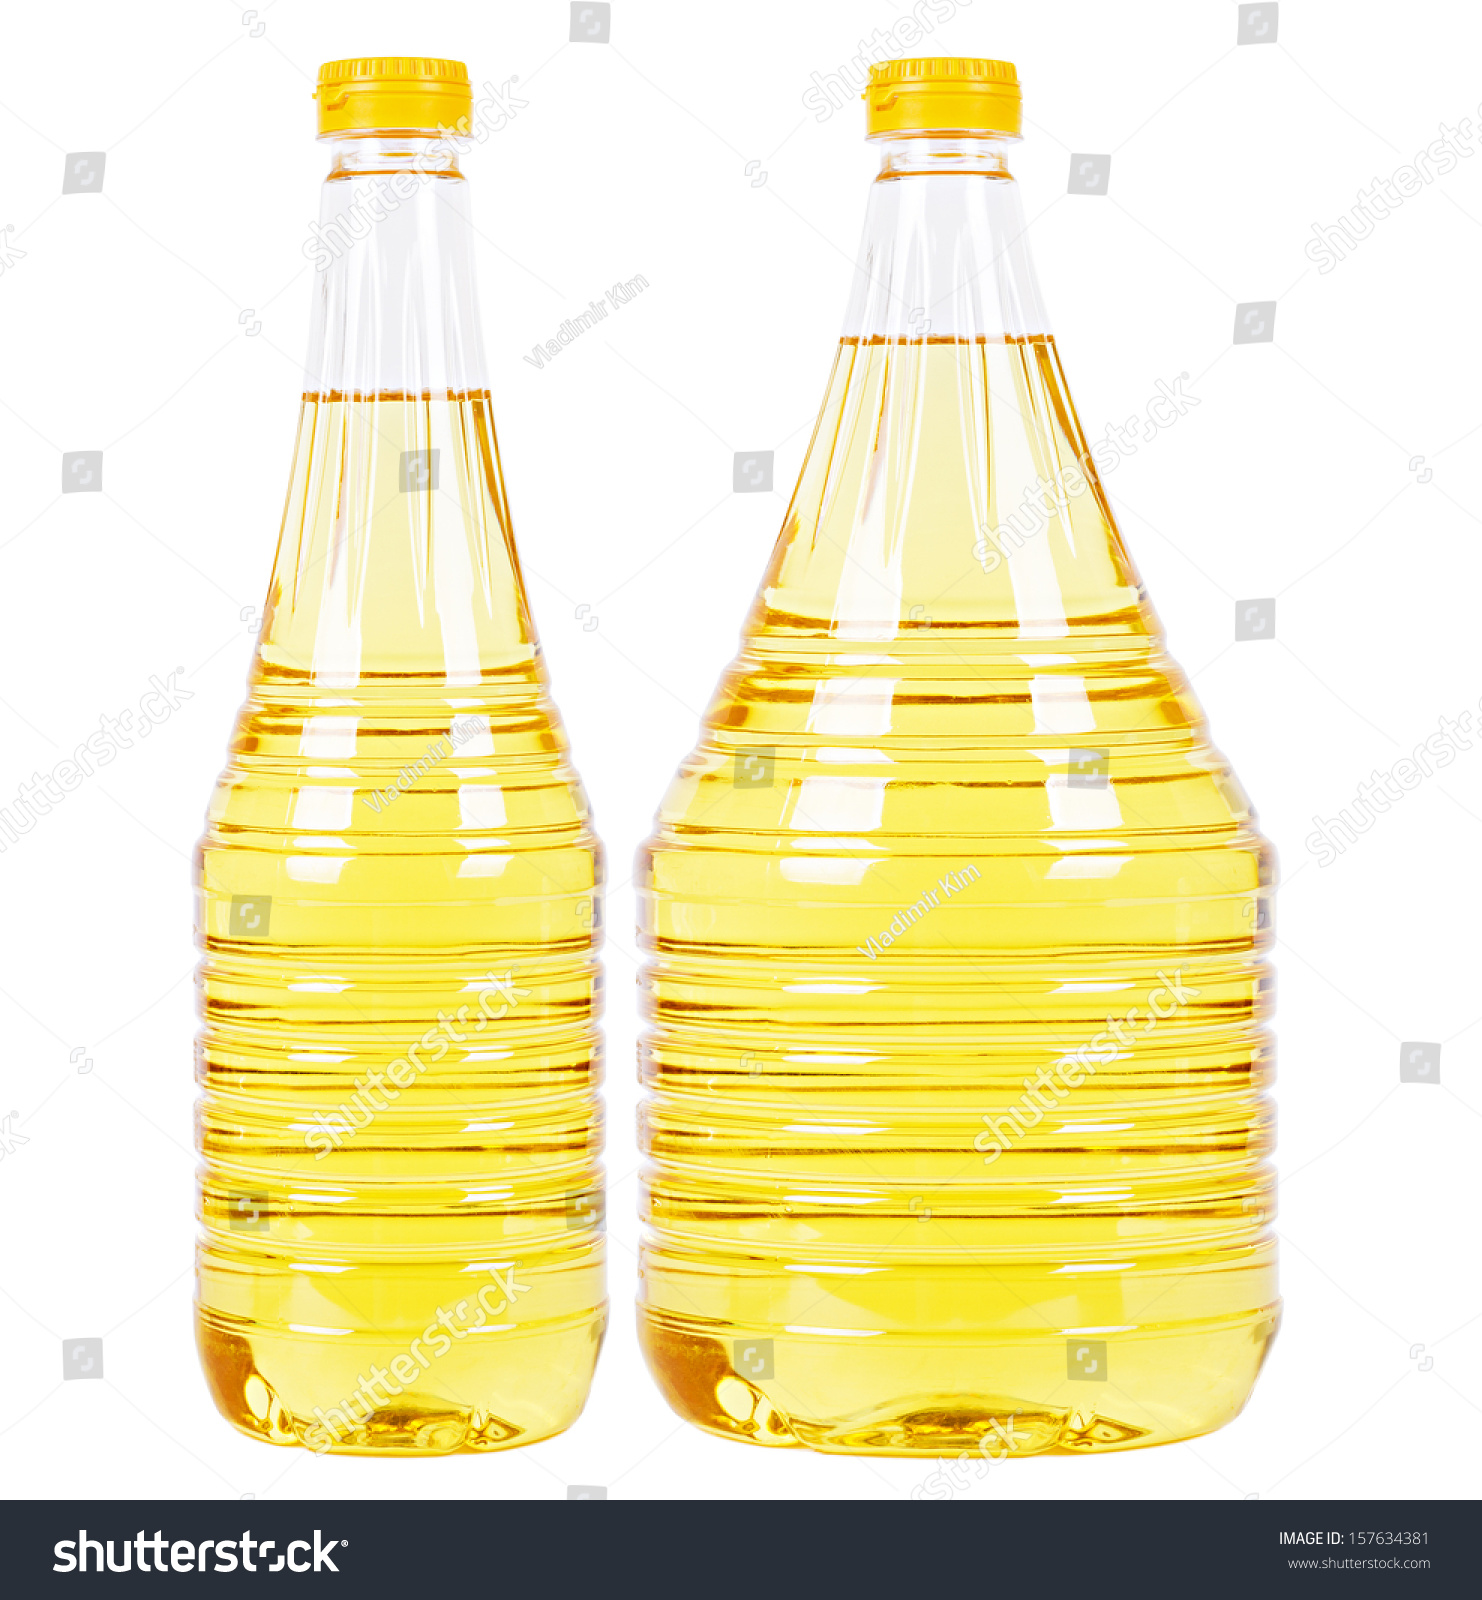 Download Two Pet Bottles Thin One Thick Stock Photo Edit Now 157634381 PSD Mockup Templates